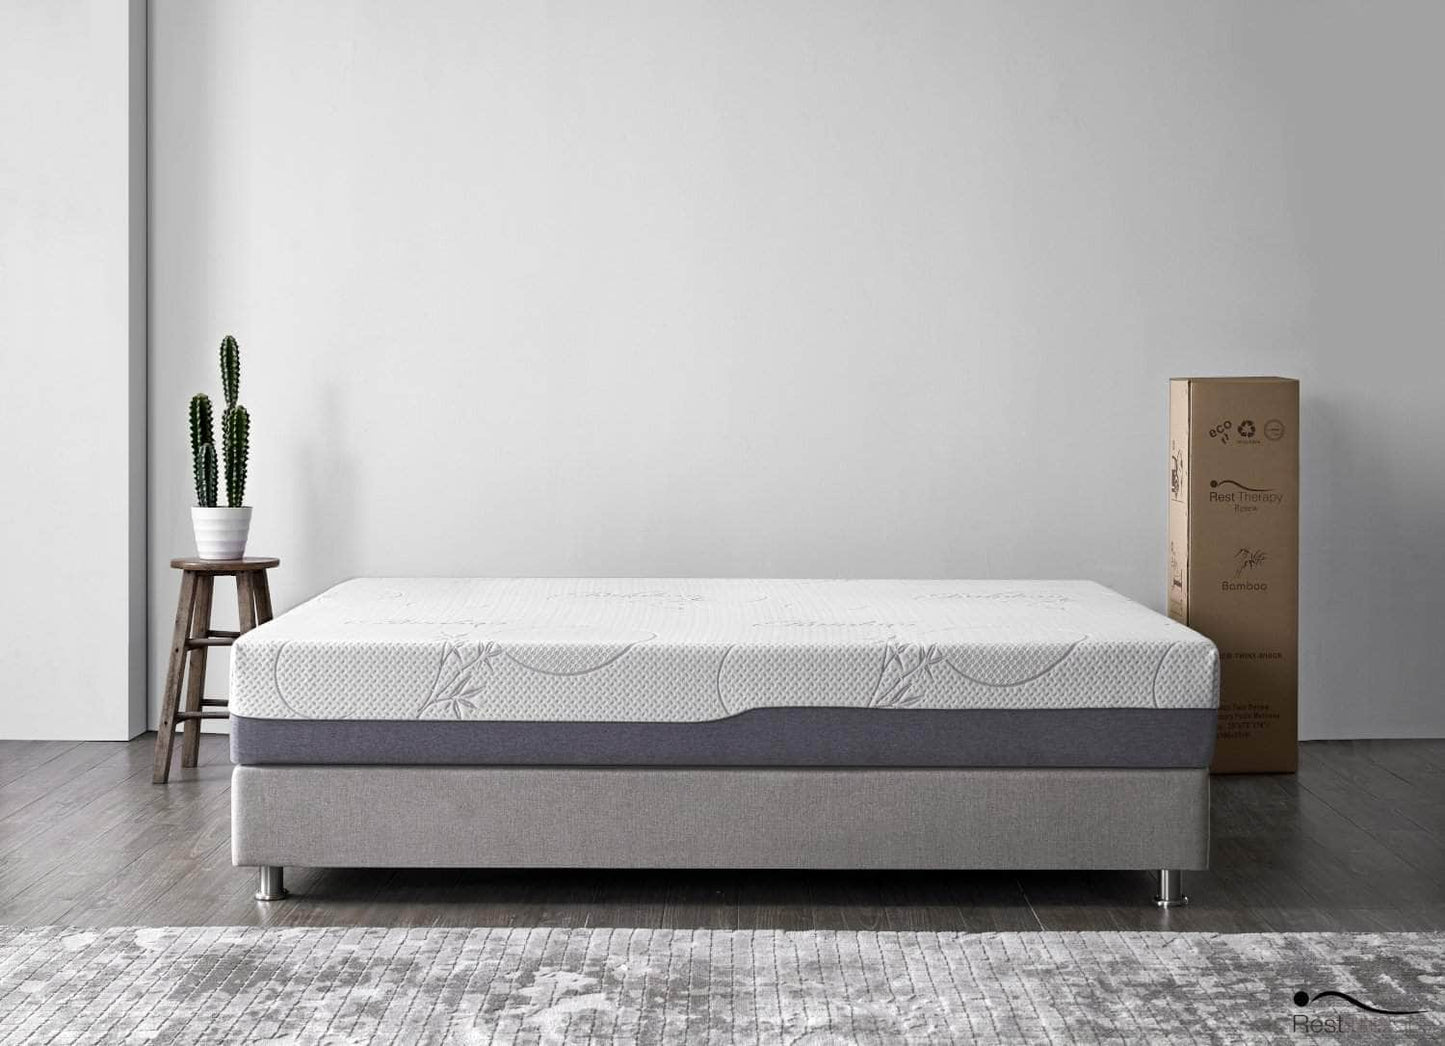 10 Inch Renew Bamboo Cool Gel Memory Foam Mattress - Available in 4 Sizes